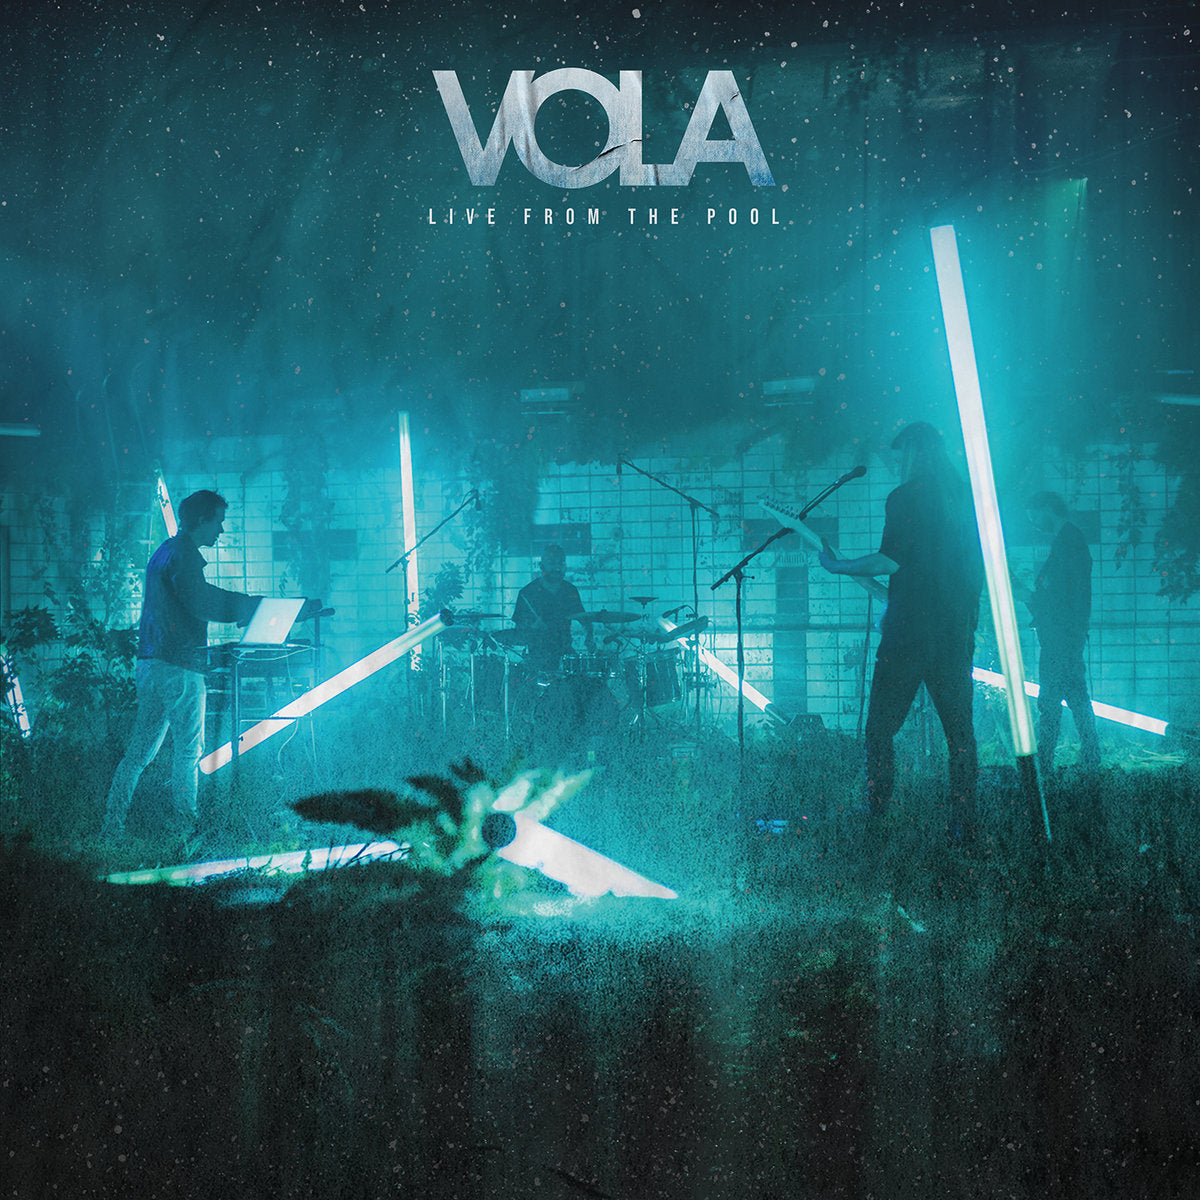 Vola "Live From The Pool" 2x12" Vinyl